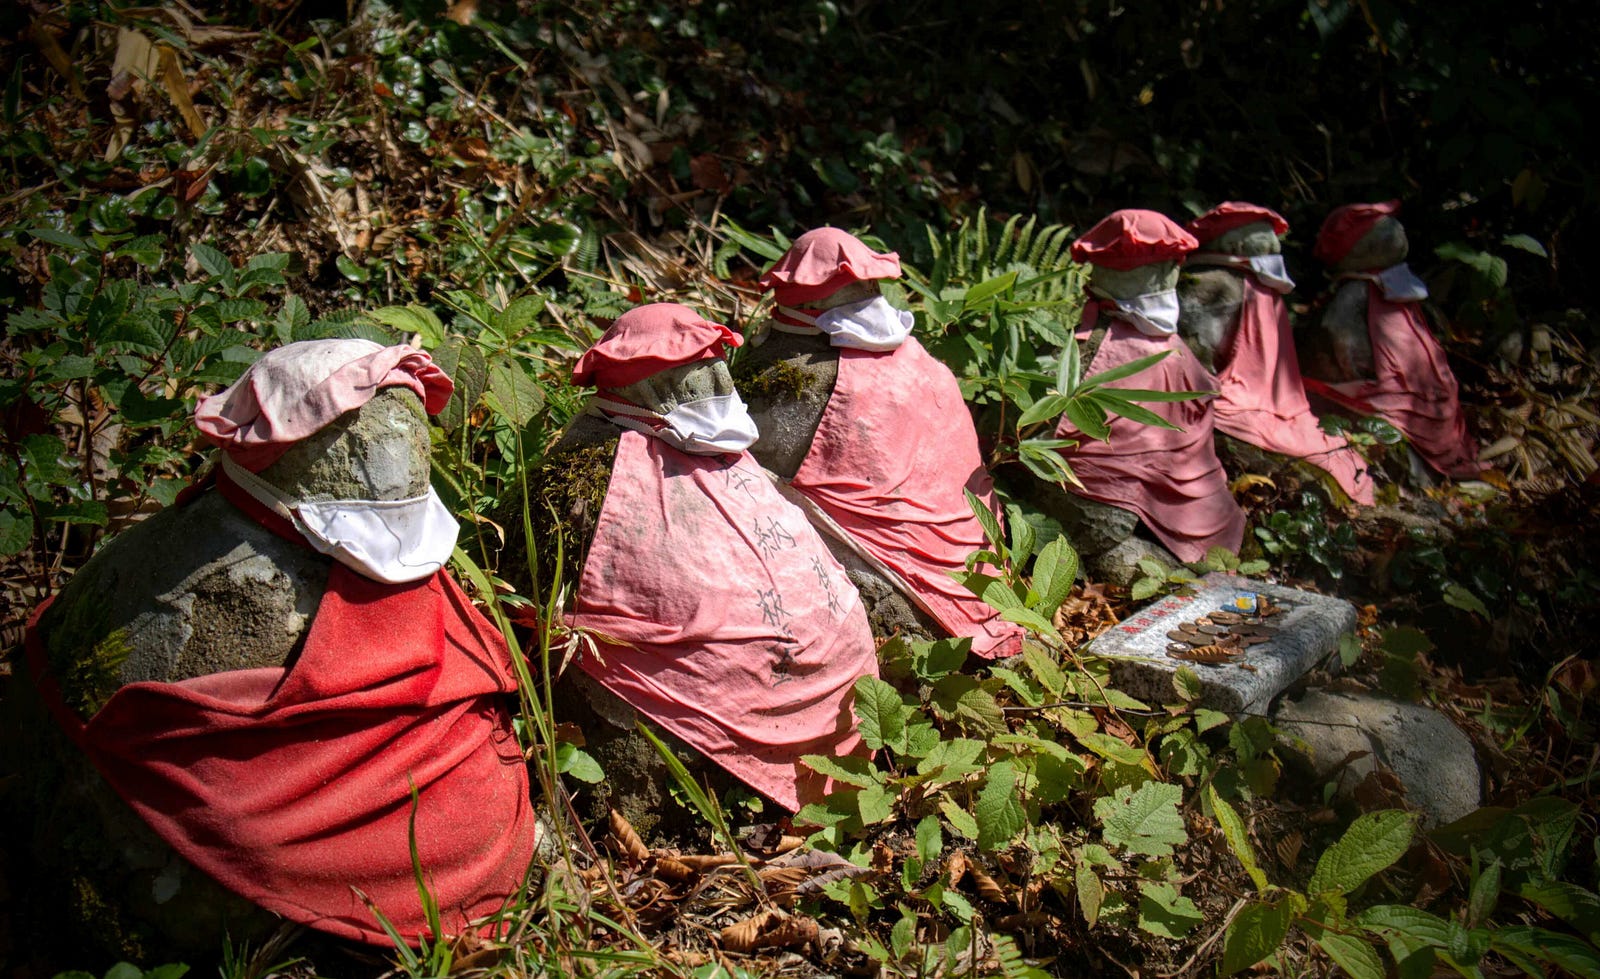 Some of the Jizo statues wearing red bibs that line the trails from Atsumi on Mt. Maya, one of the 100 Famous Mountains of Yamagata.